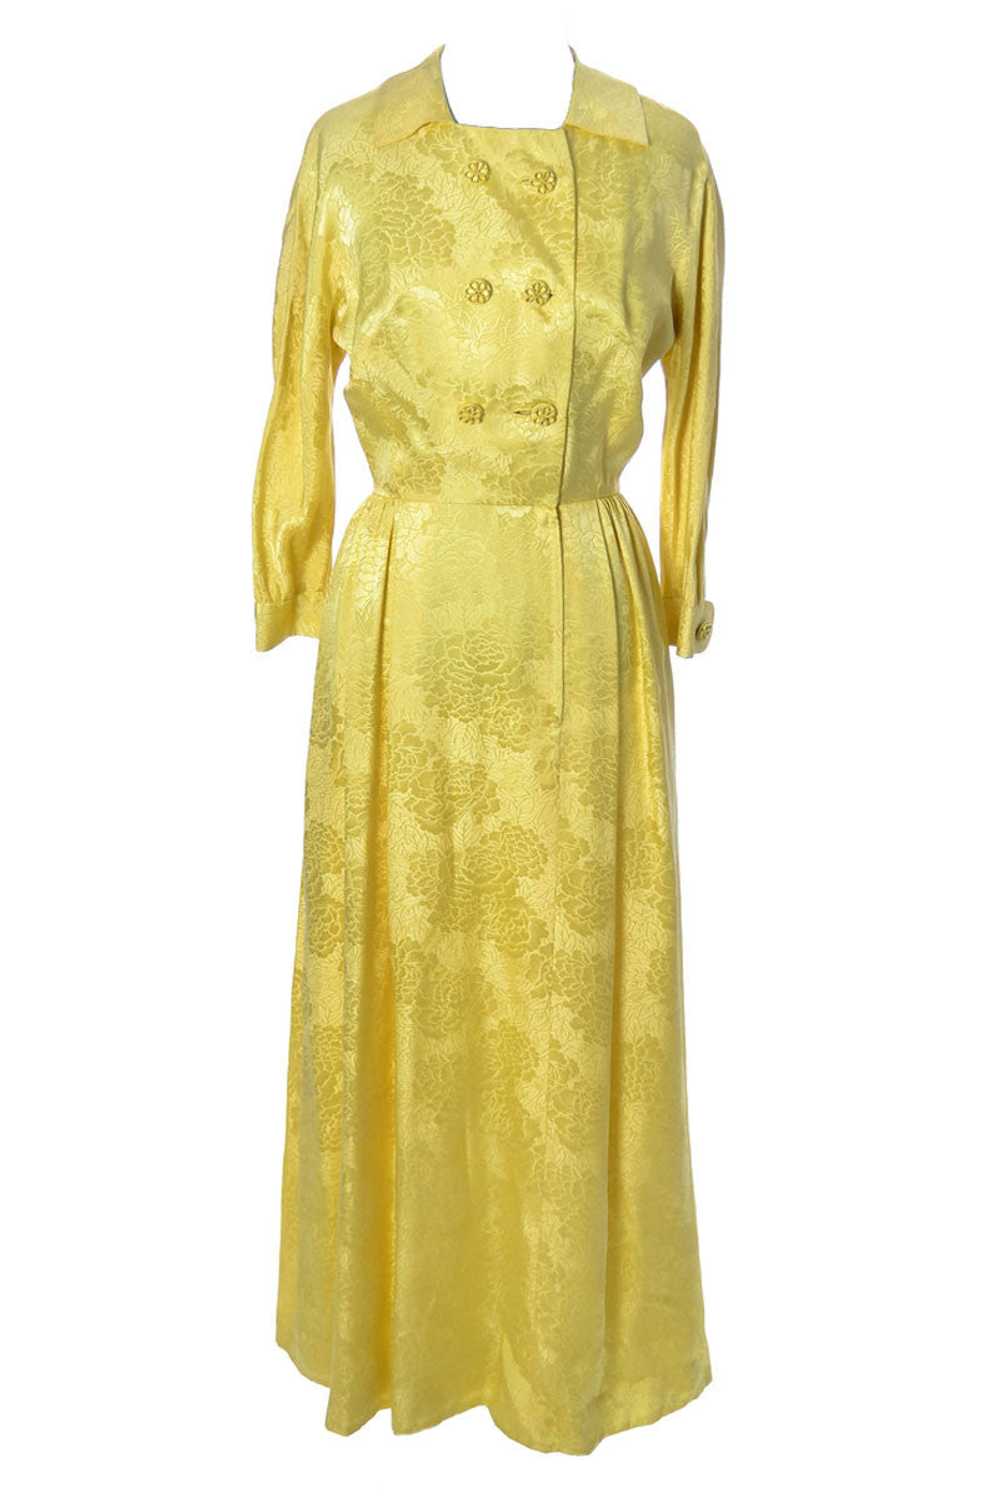 Chinese Silk Vintage Yellow Jacquard Robe or Host… - image 2